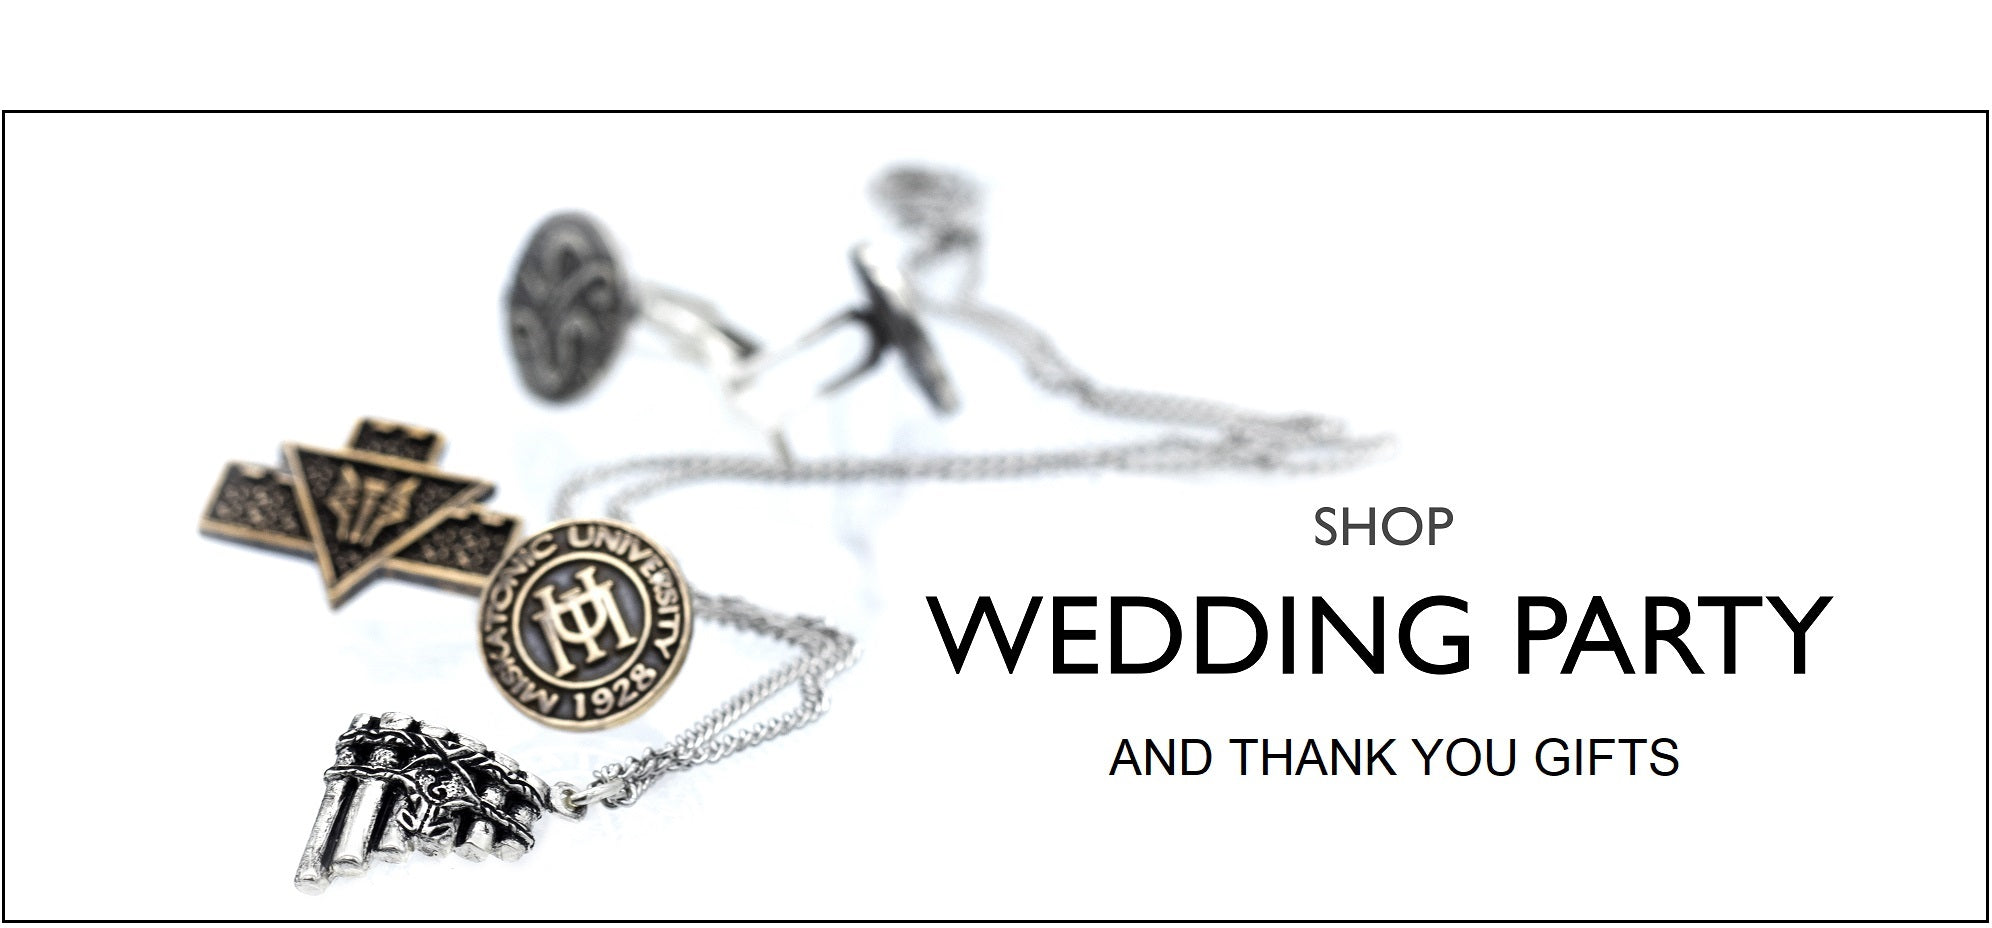 Buy gifts for your wedding party and thank you gifts